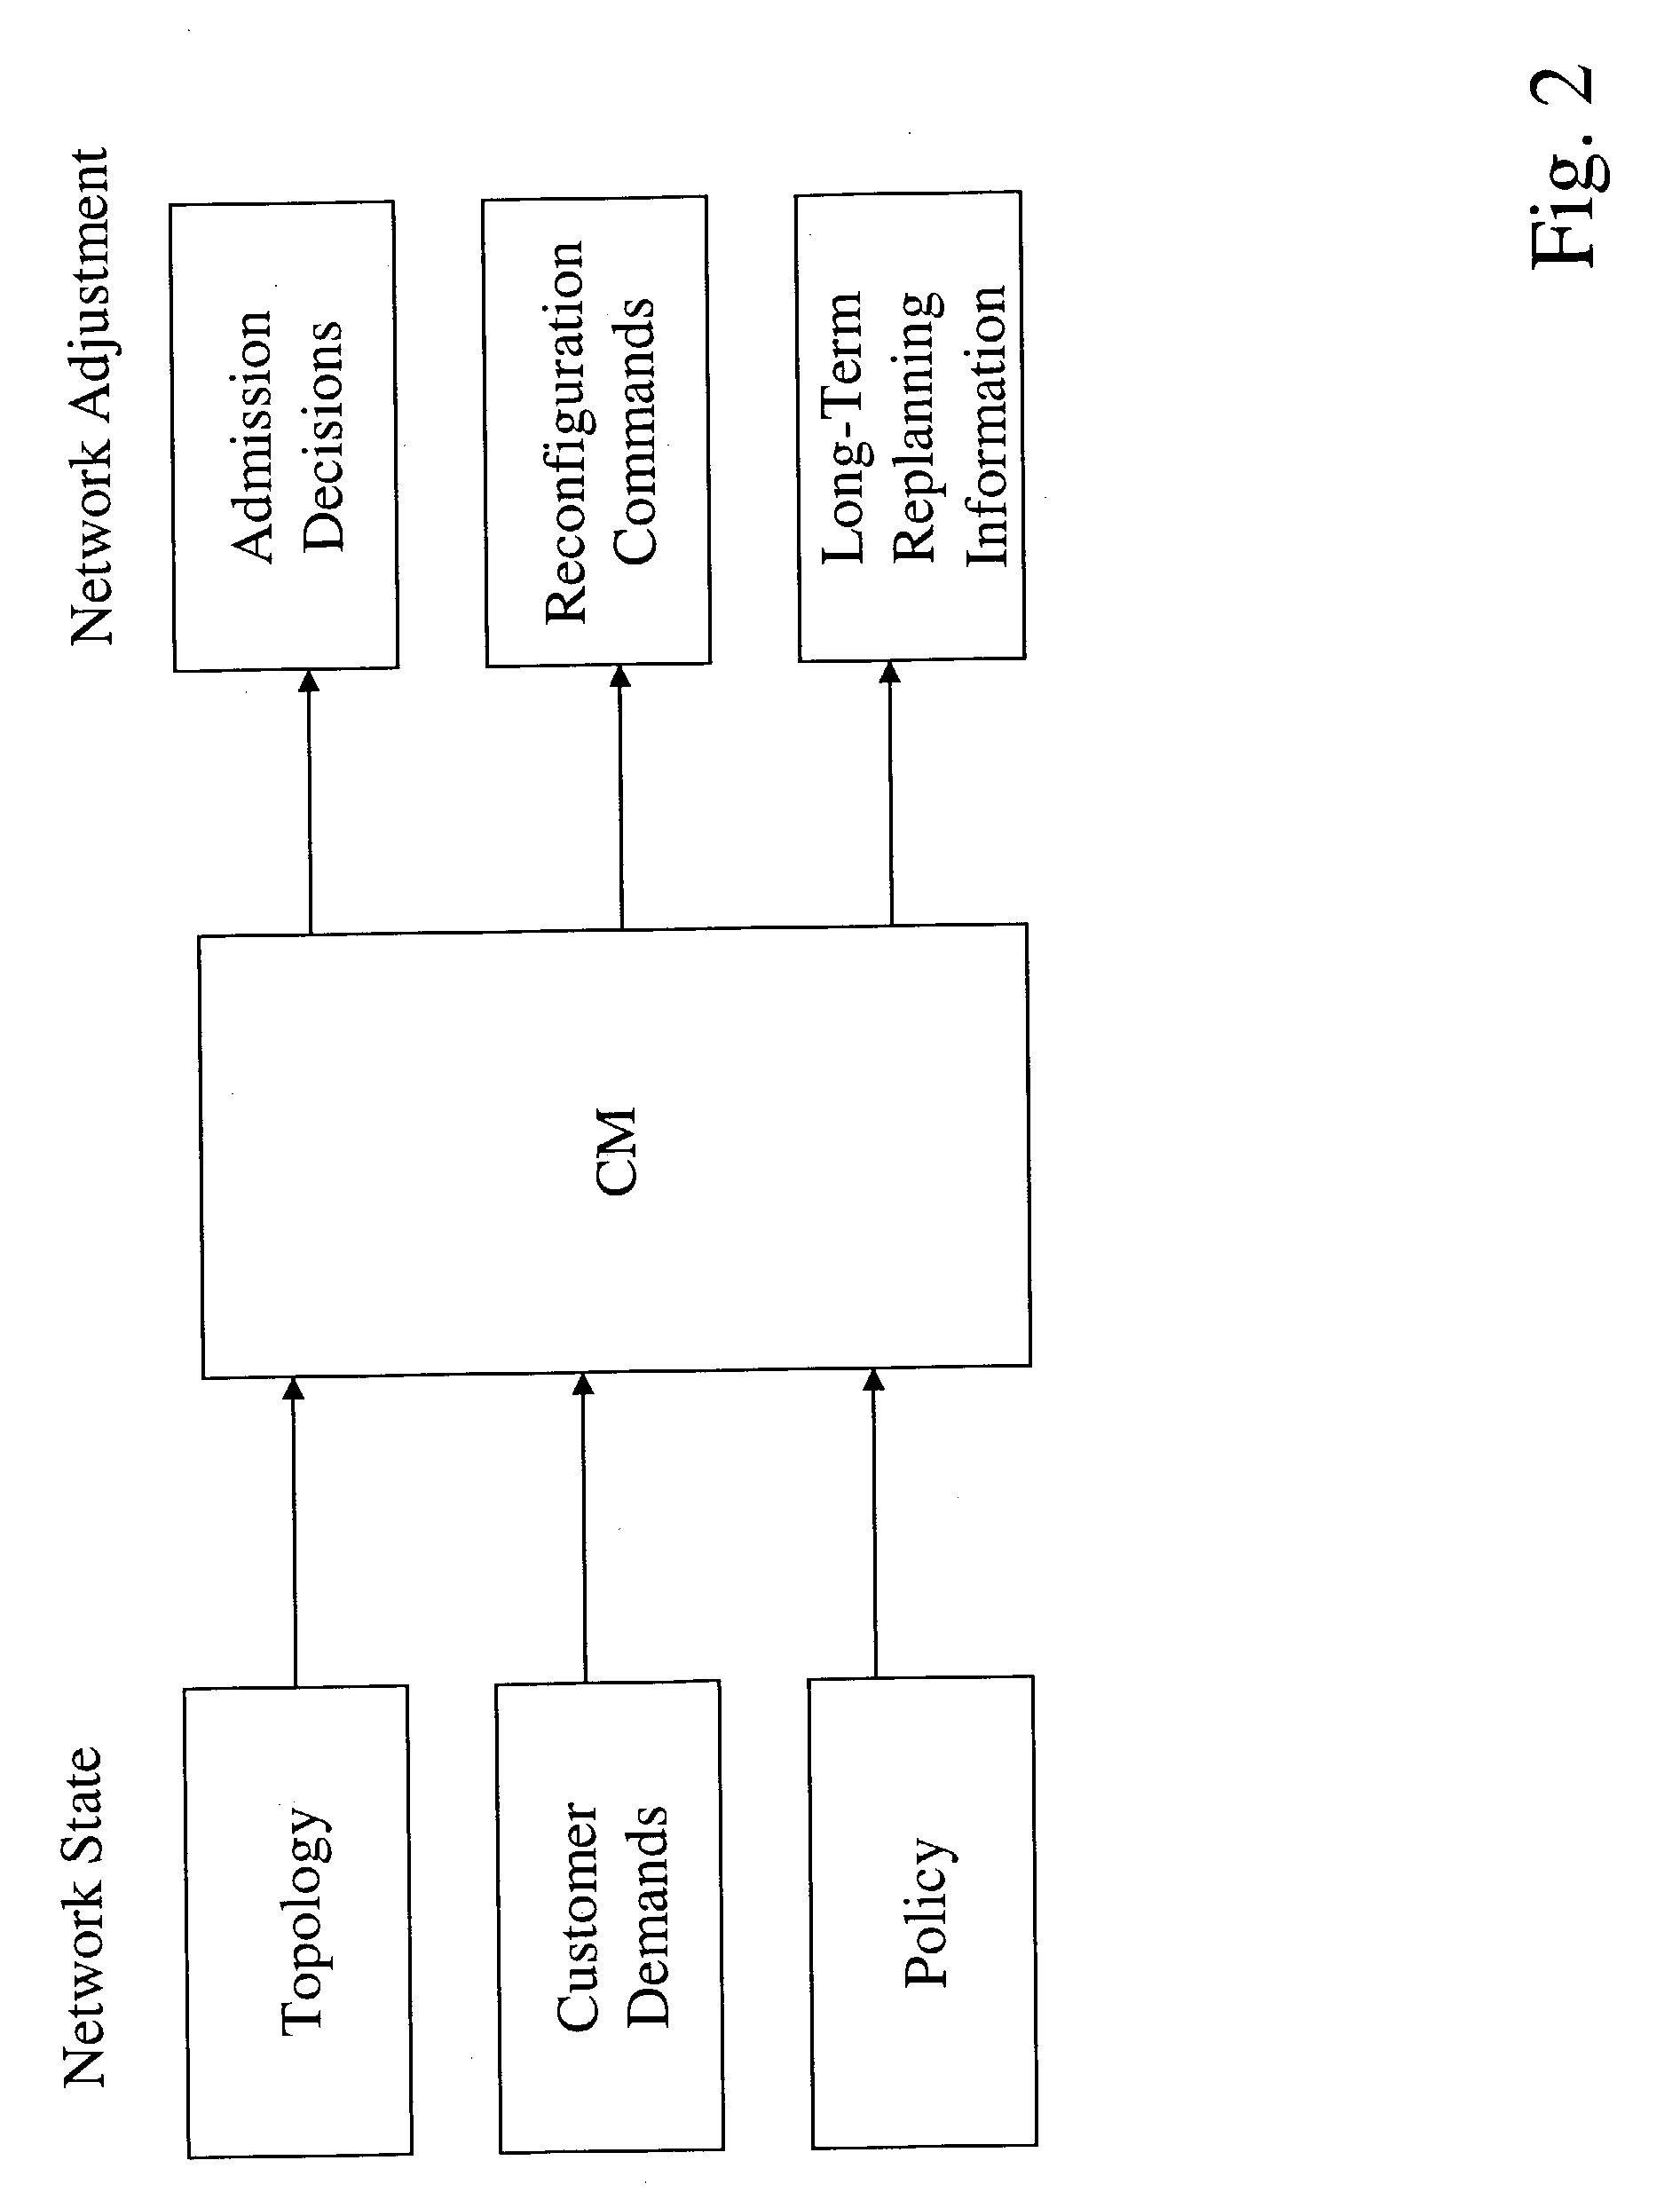 Methods and apparatus for controlling multi-layer communications networks